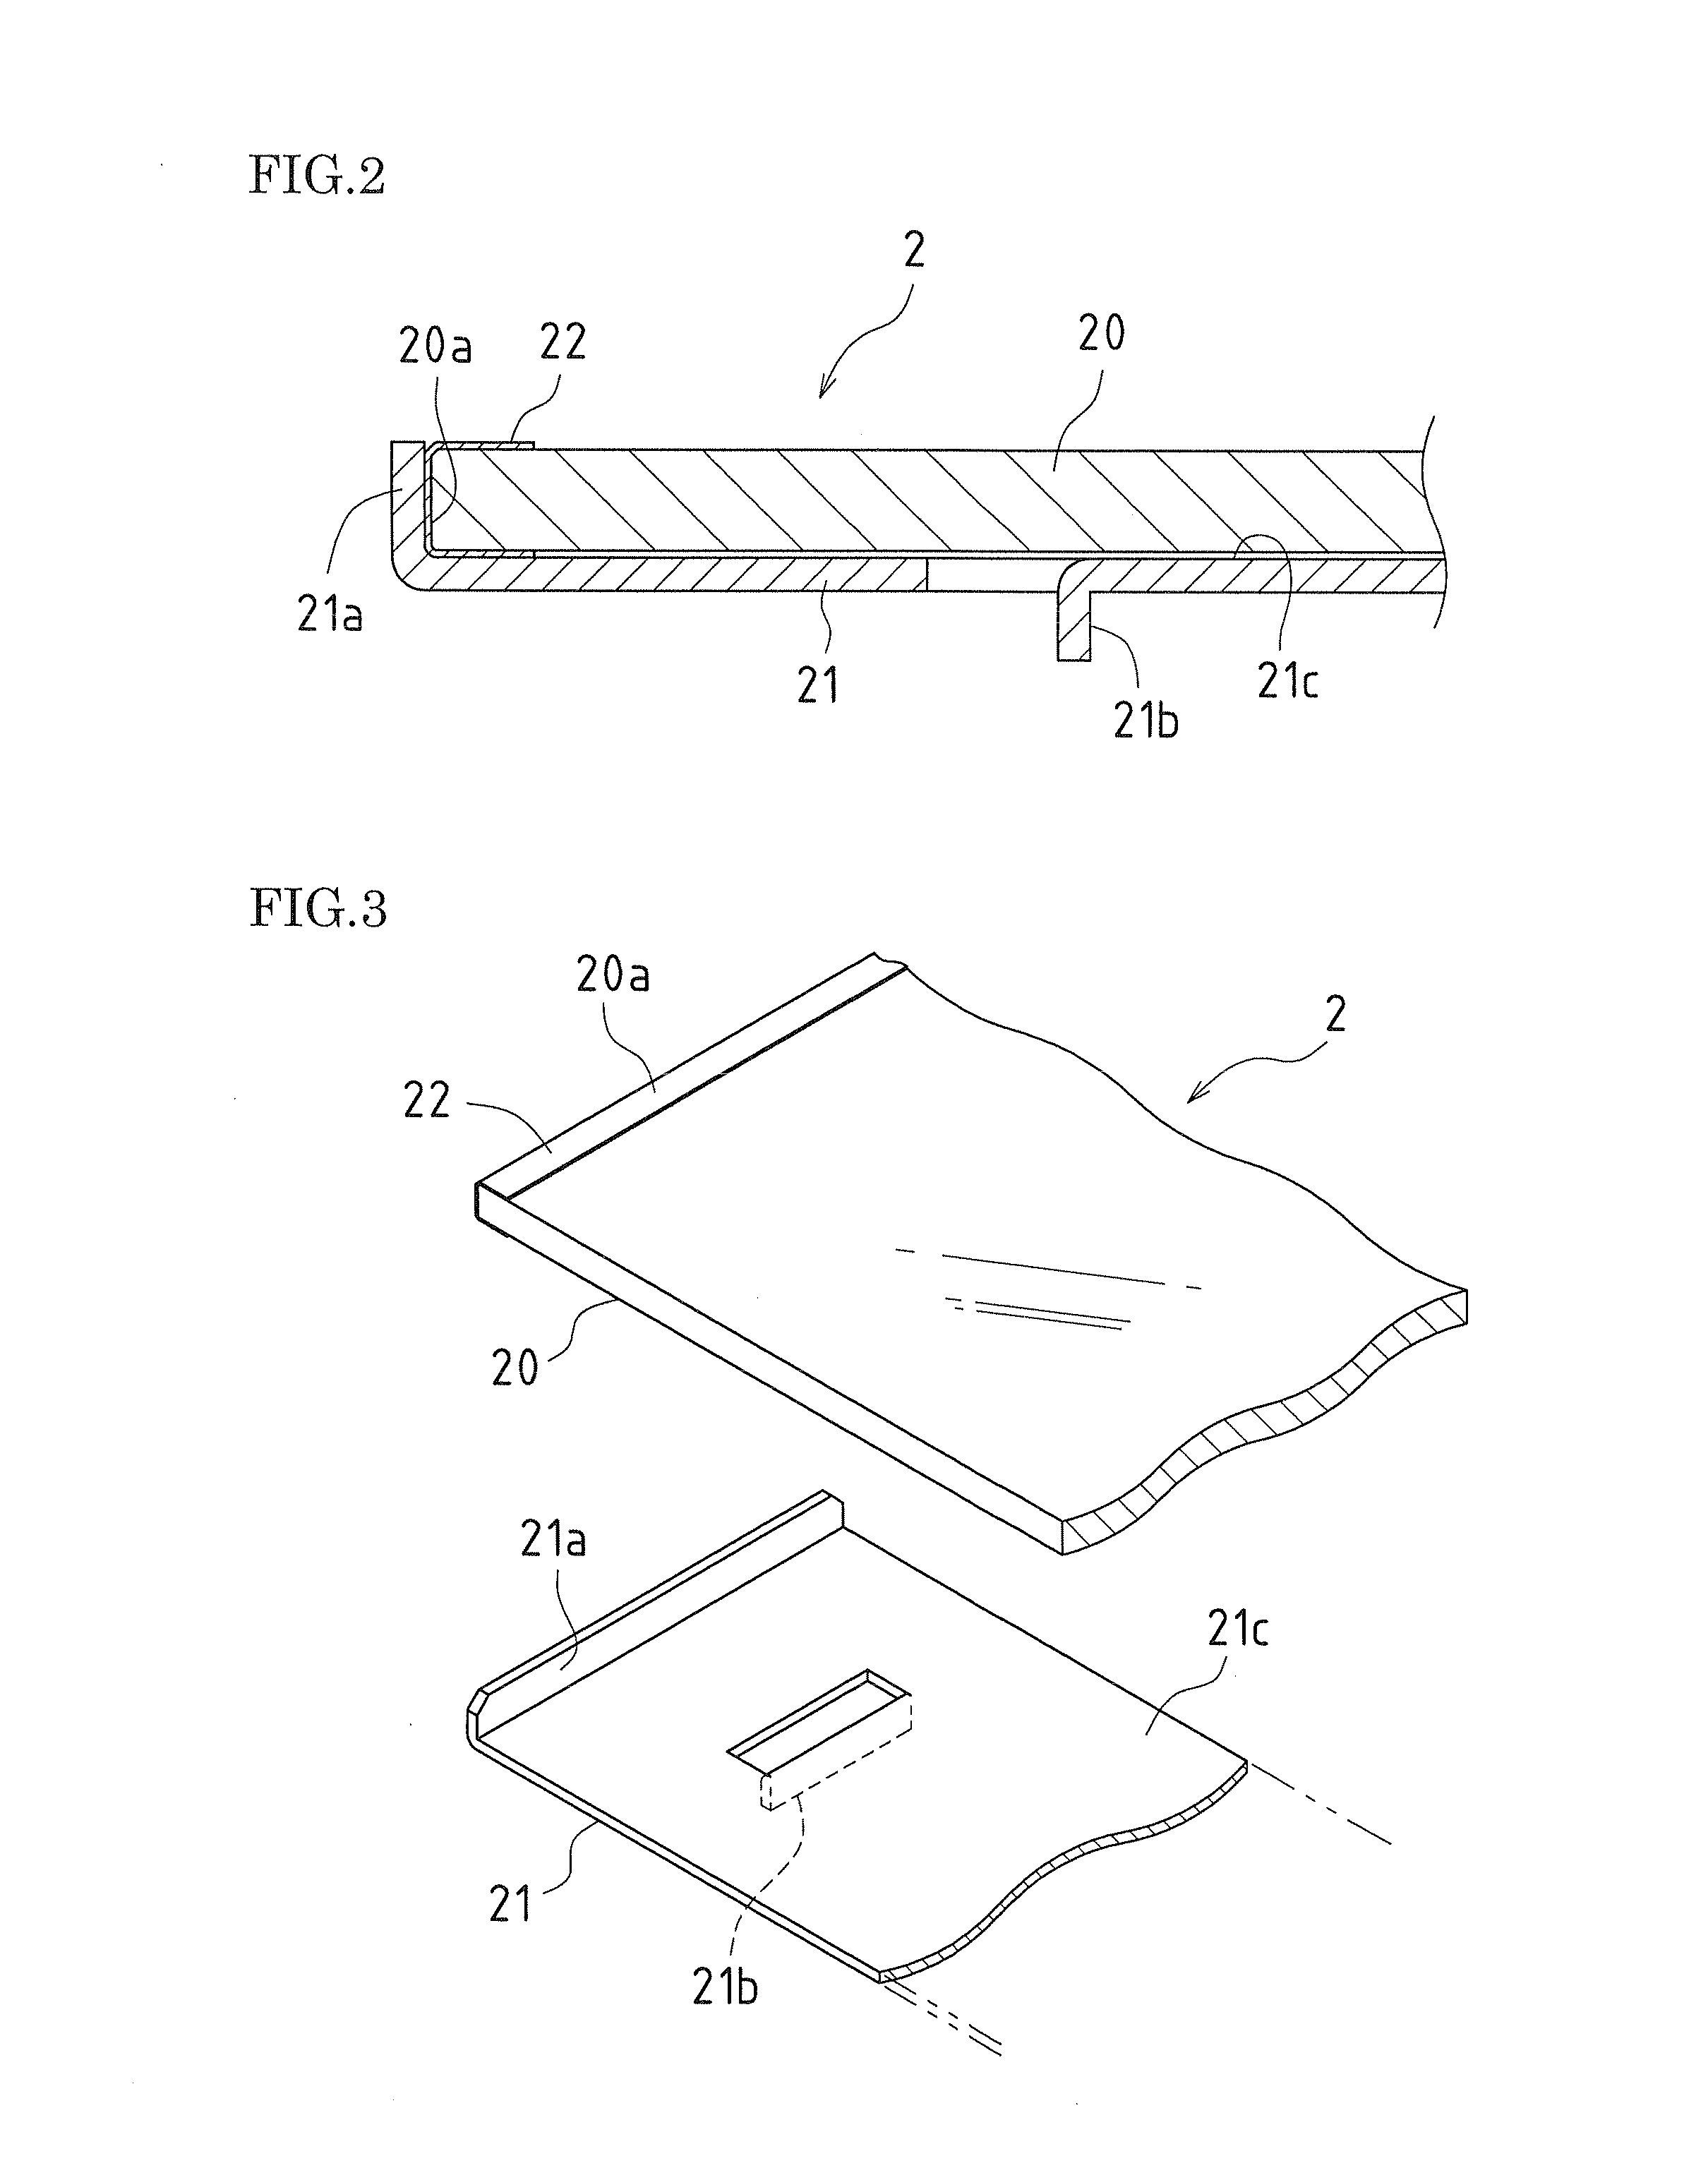 Solar cell module, solar cell attachment stand, photovoltaic power generating system